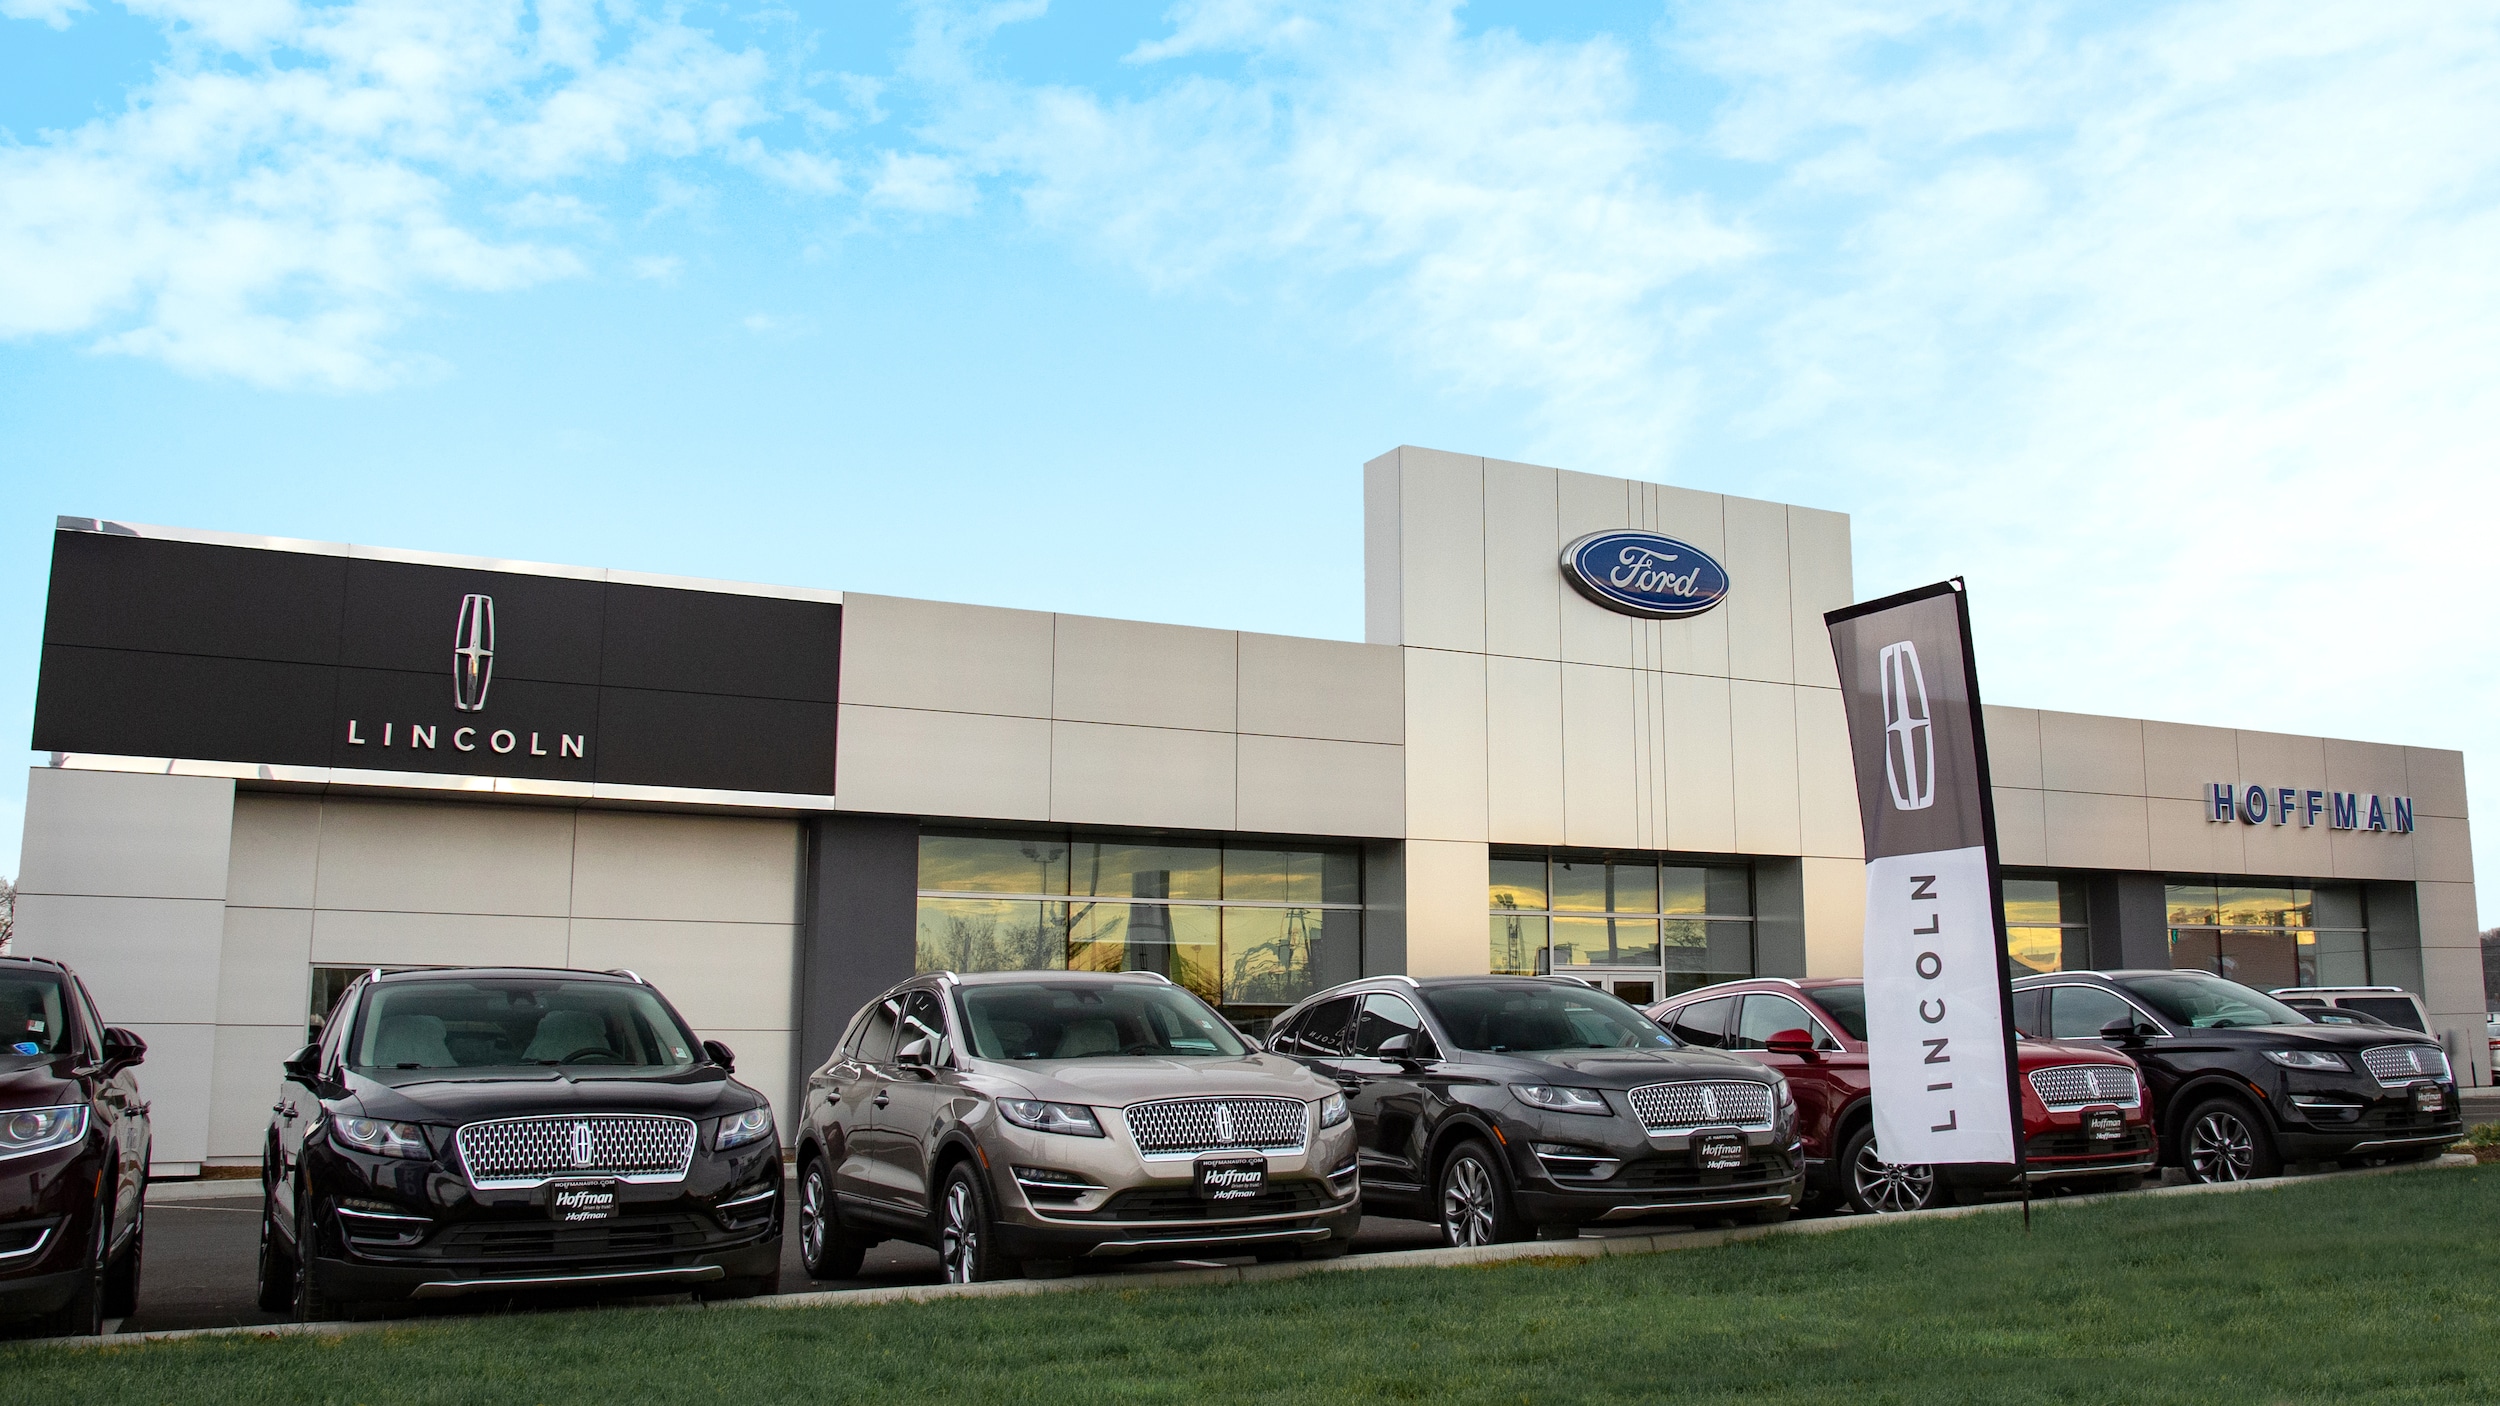 Welcome To Hoffman Ford Lincoln Inc Proudly Serving Hartford Farmington Glastonbury Windsor And Manchester Drivers